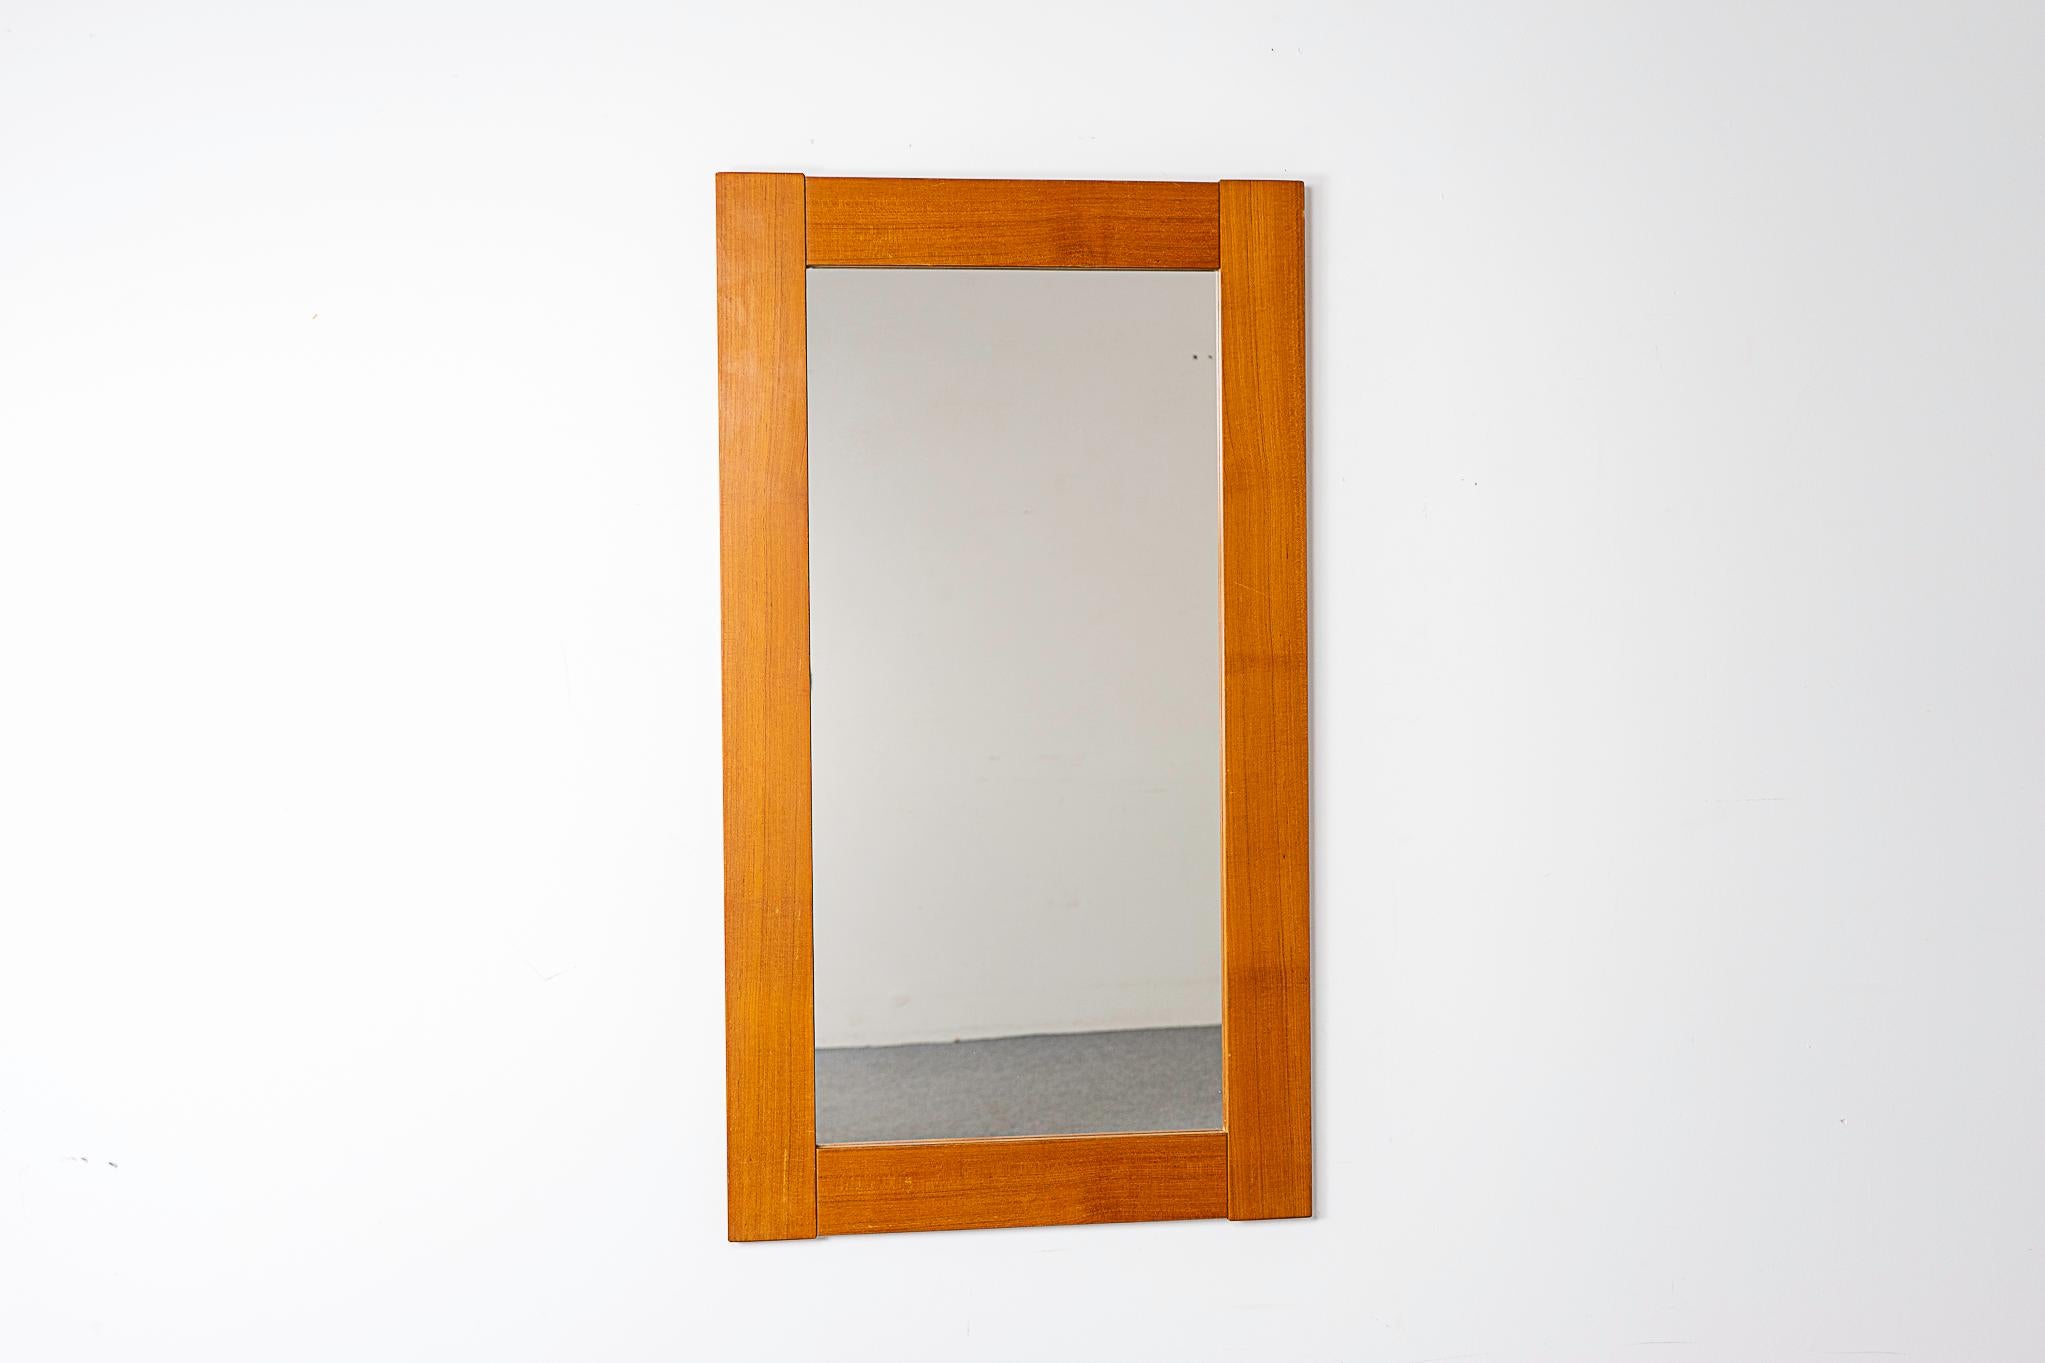 Teak mid-century mirror, circa 1960's. Clean modern design, enjoy it in any room in the home. Minor marks consistent with age.